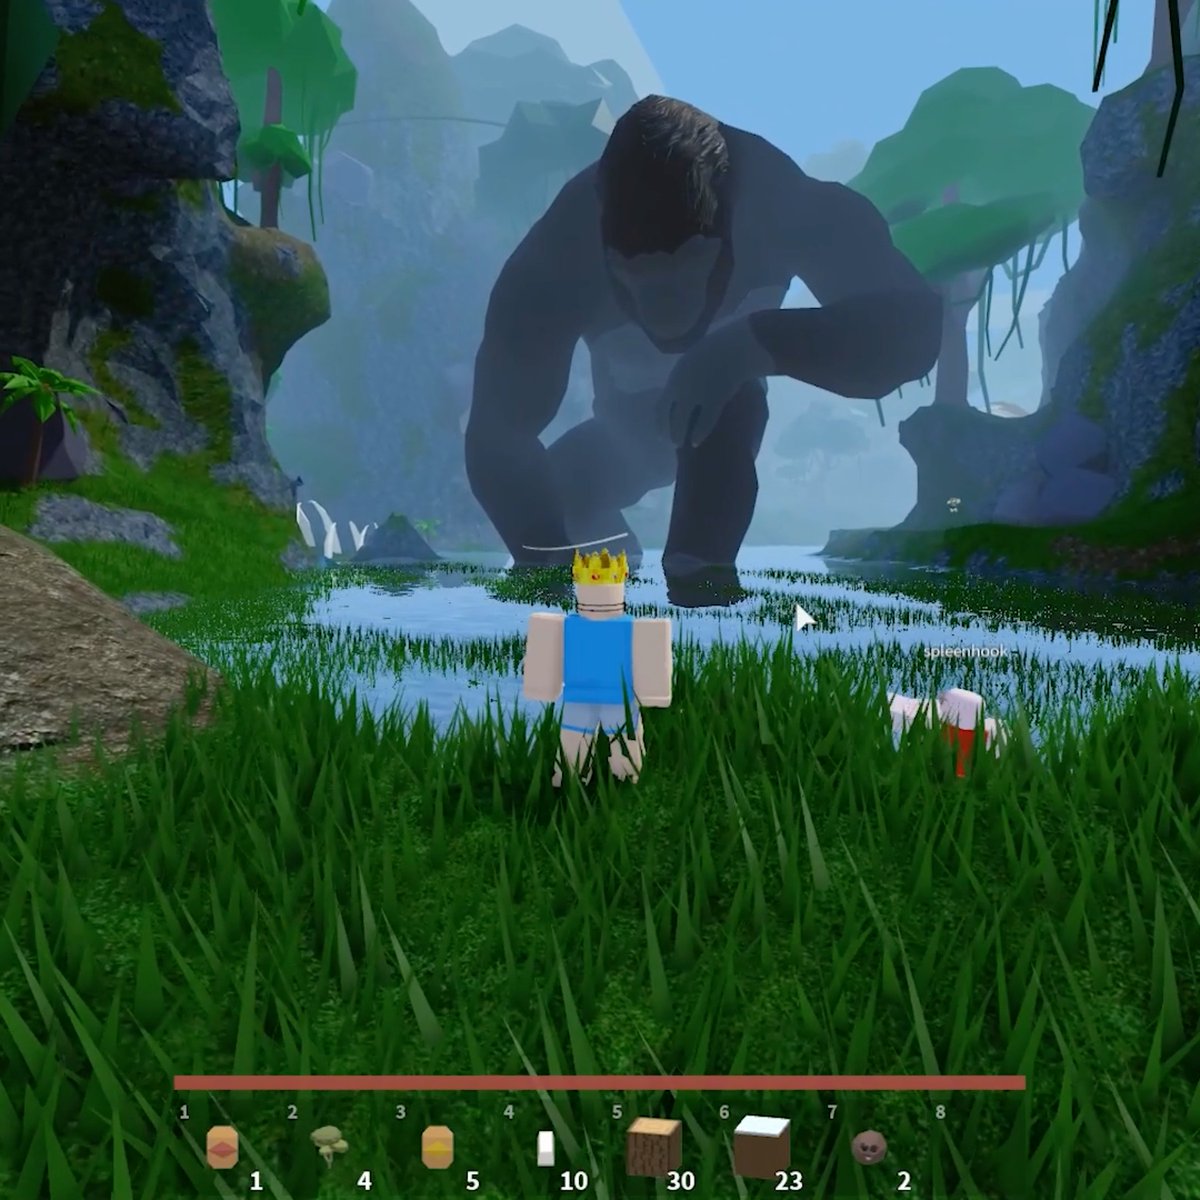 Roblox Islands On Twitter The Godzilla Vs Kong Event Ends On April 4th Don T Miss Out On Collecting All The Exclusive Rewards - godzilla event roblox